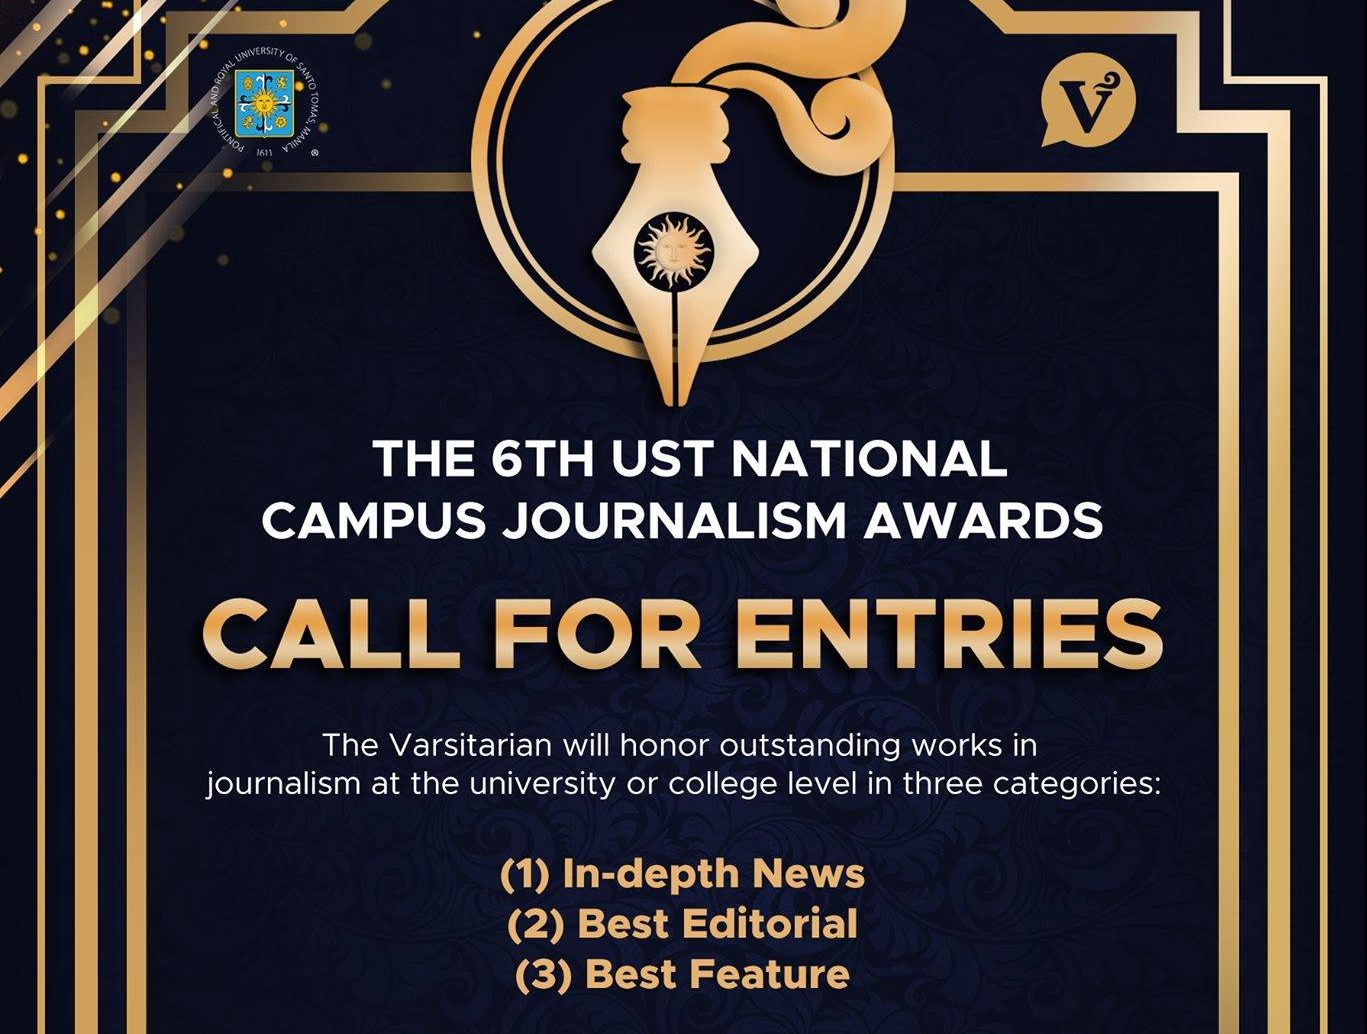 Varsitarian to host campus journ awards; calls for entries